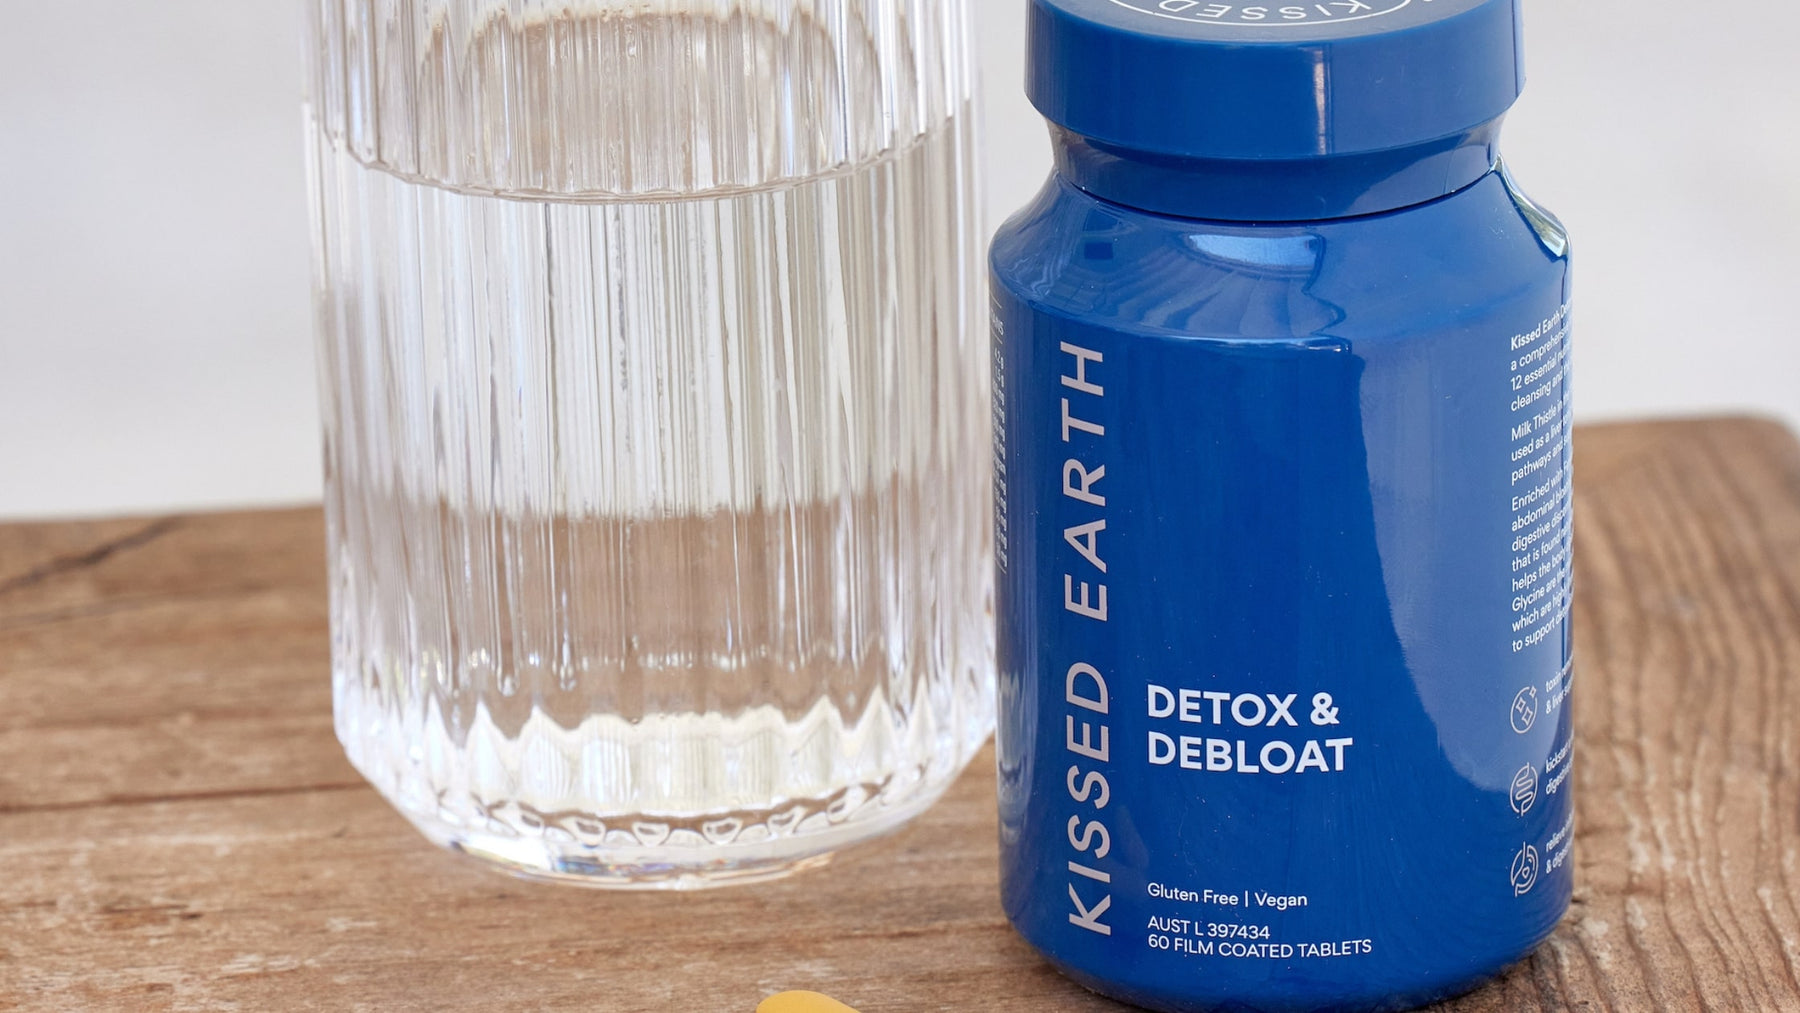 Best Detox Vitamins: Tips On How To Use